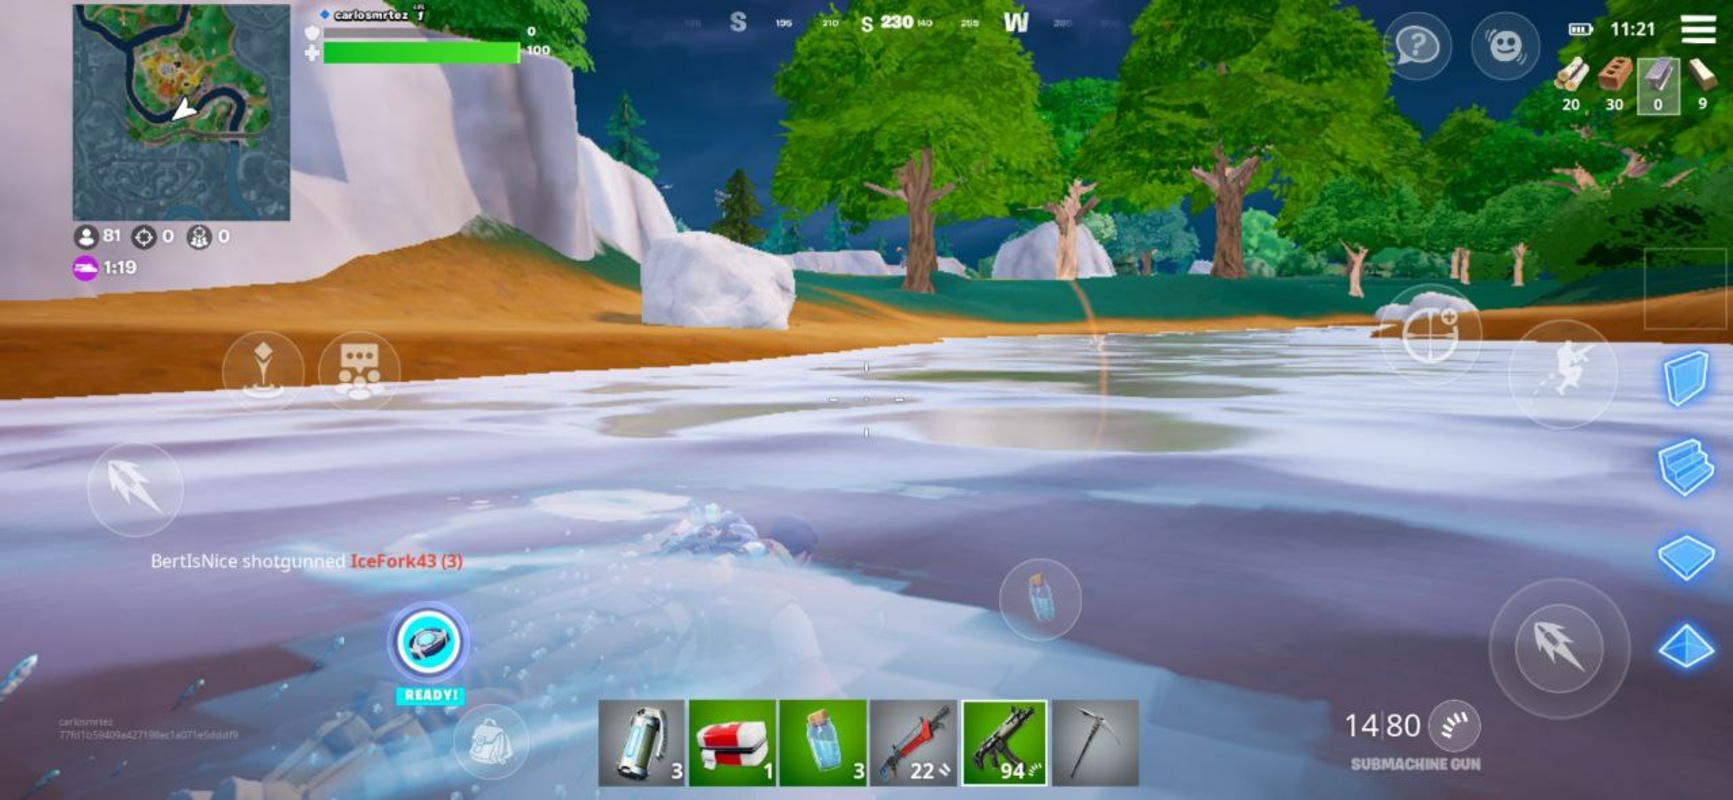 Fortnite 29.10.0-32391220-Android APK for Android Screenshot 6